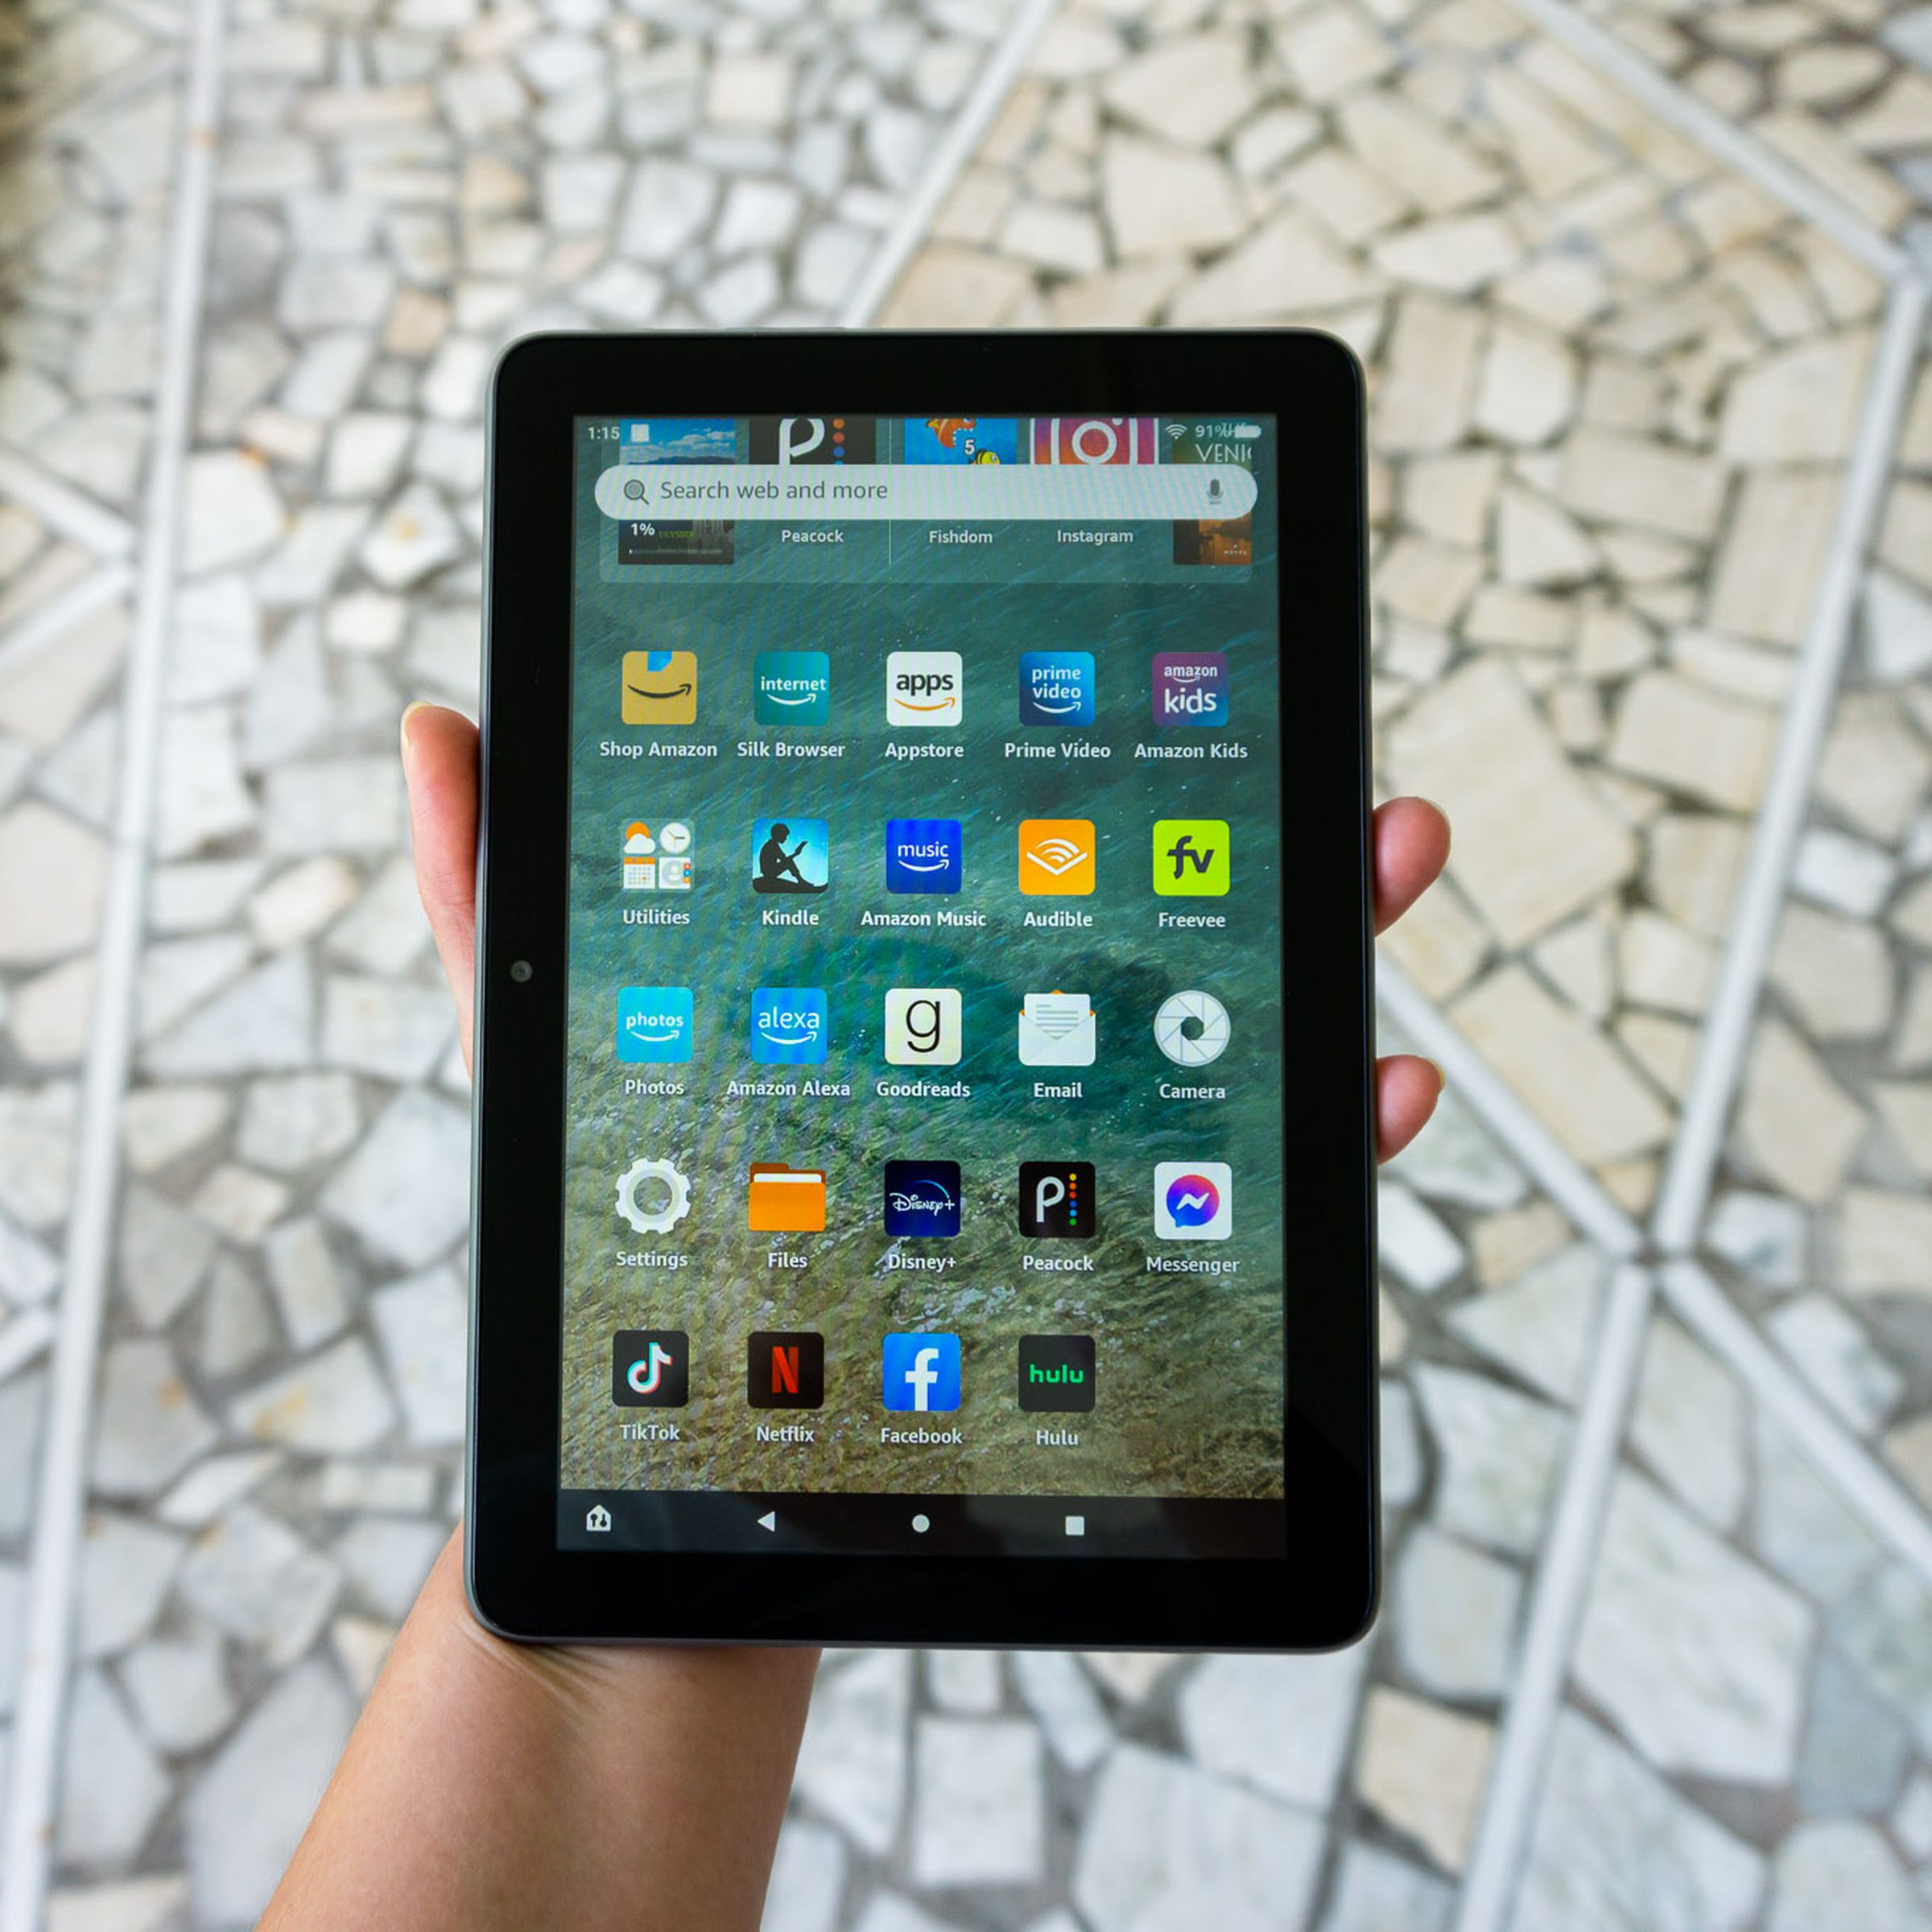 A person holding the Amazon Fire HD 8 Plus tablet